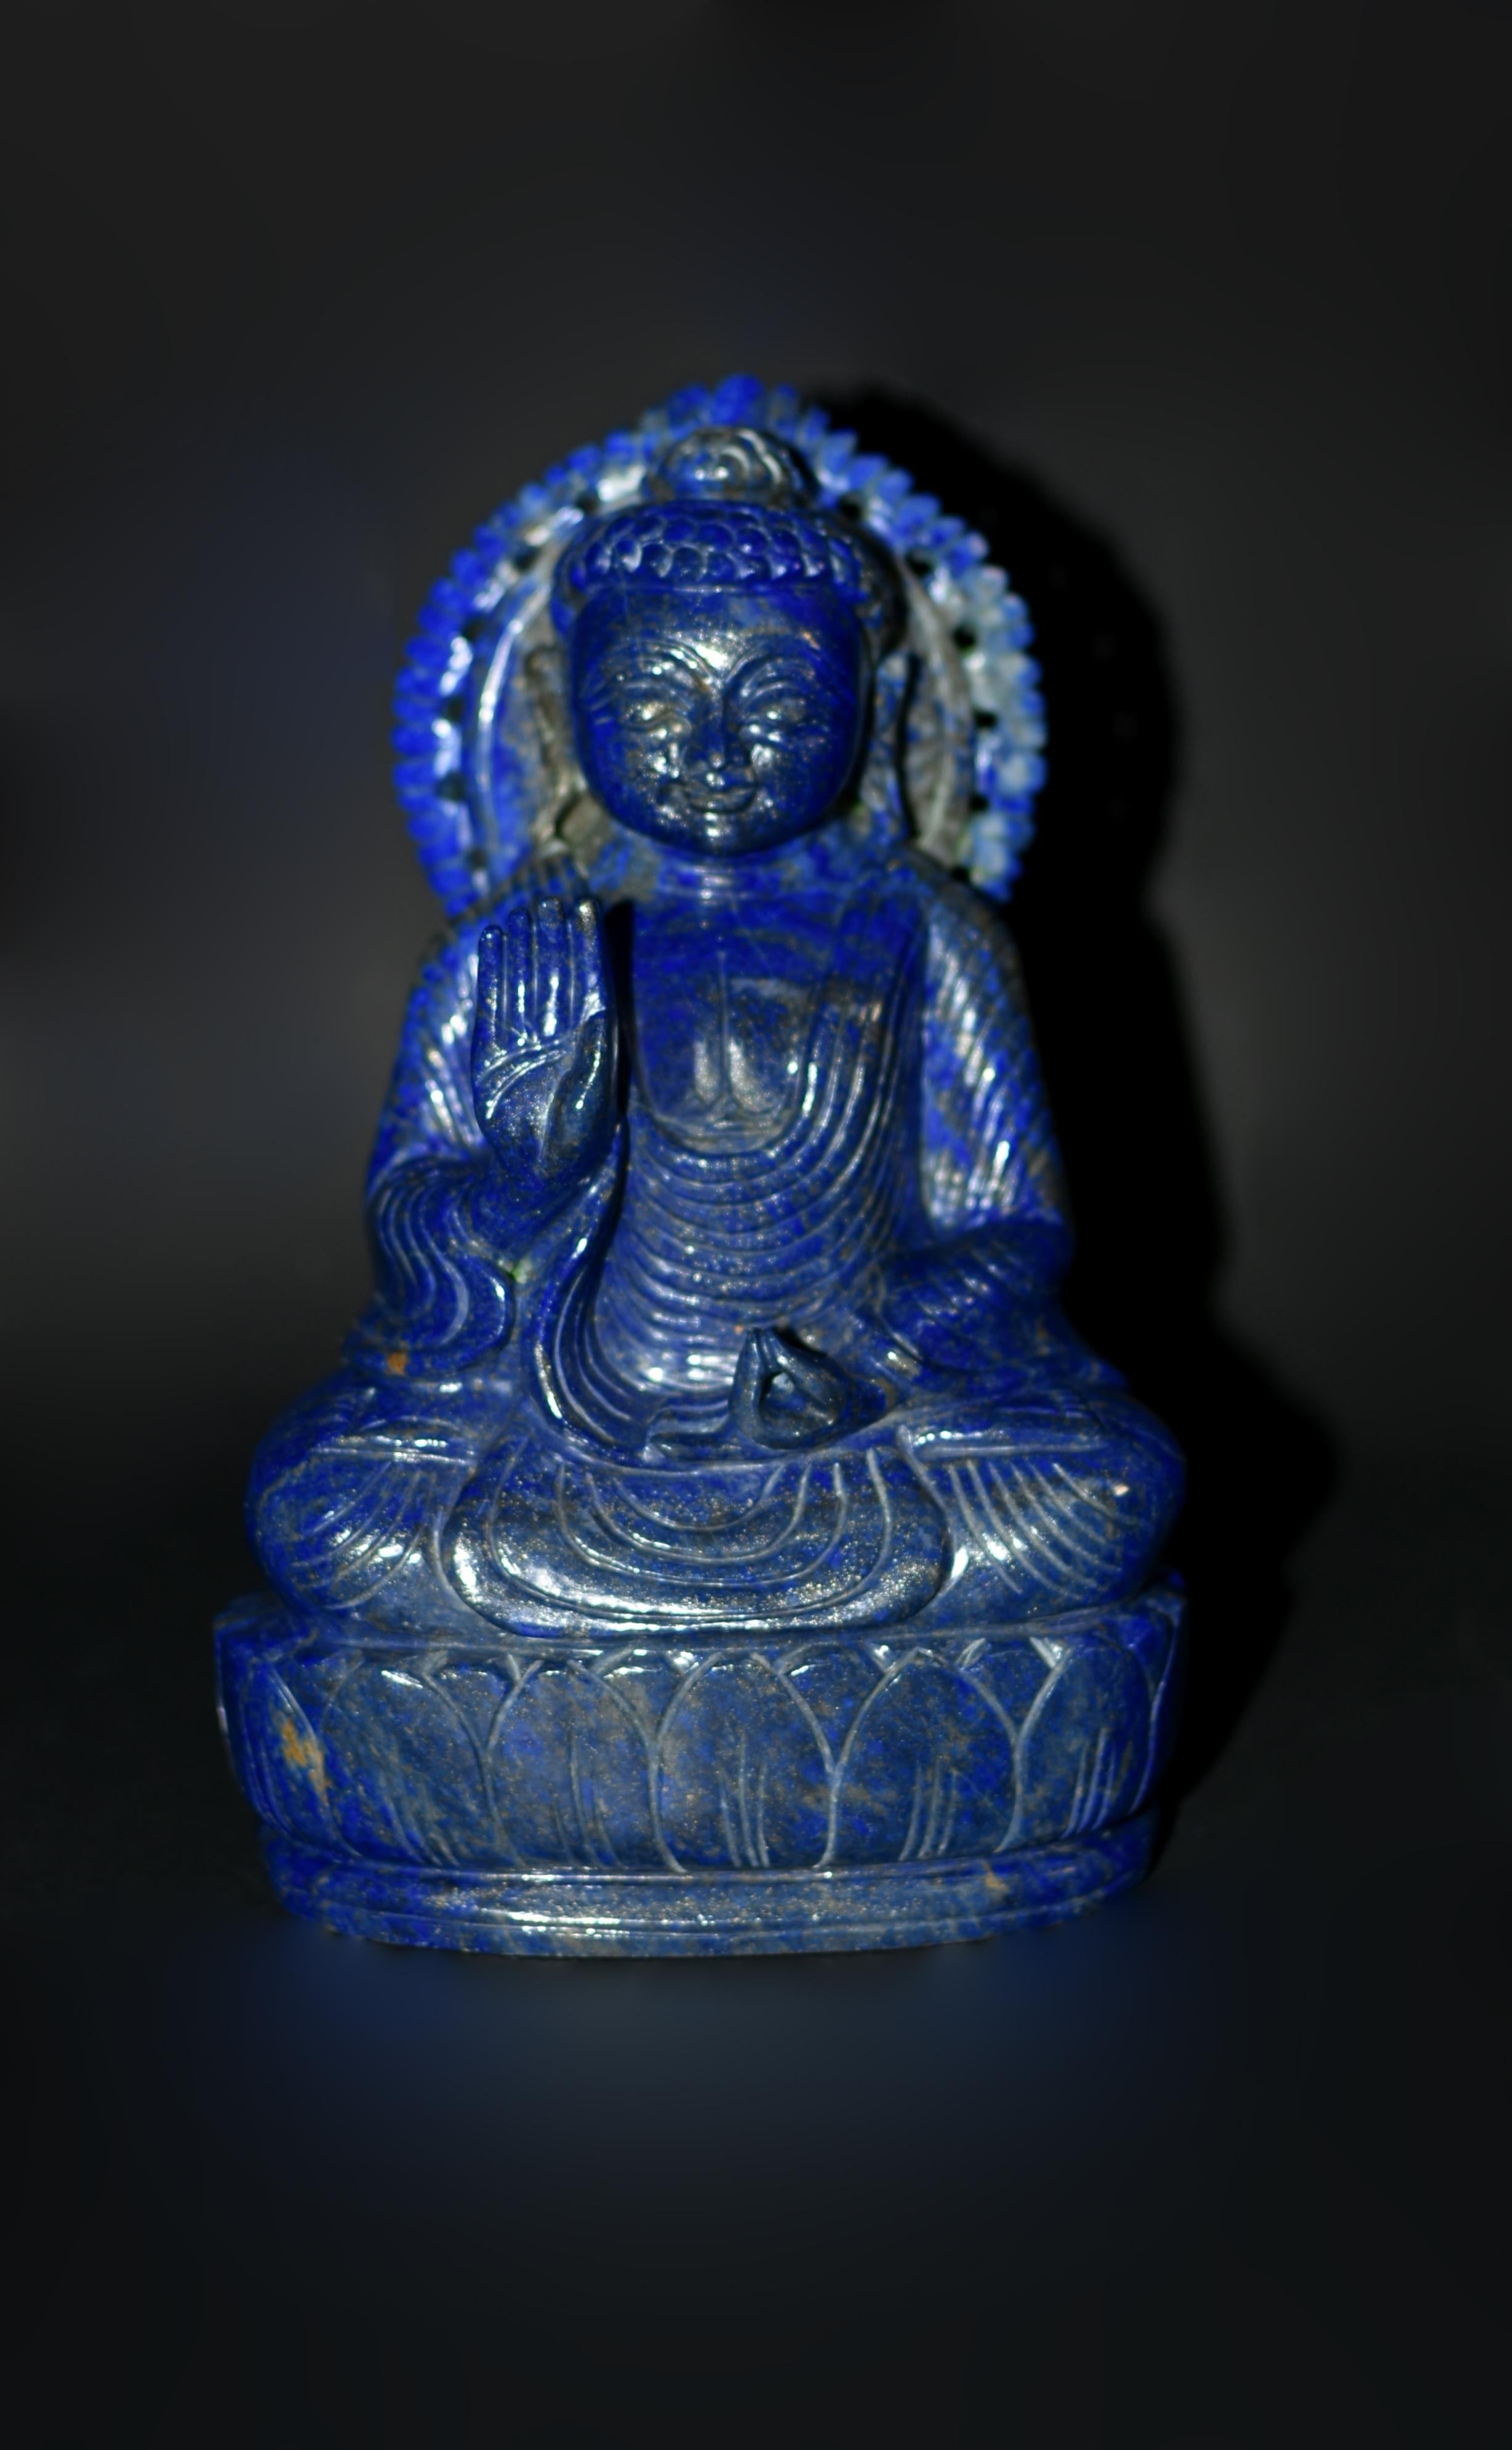 Finely carved from the highest grade natural lapis lazuli from Afghanistan, this 6-lb gemstone statue exudes an aura of peace and tranquility, portraying Shakyamuni, the historical Buddha. His round face, adorned with large downcast eyes and long